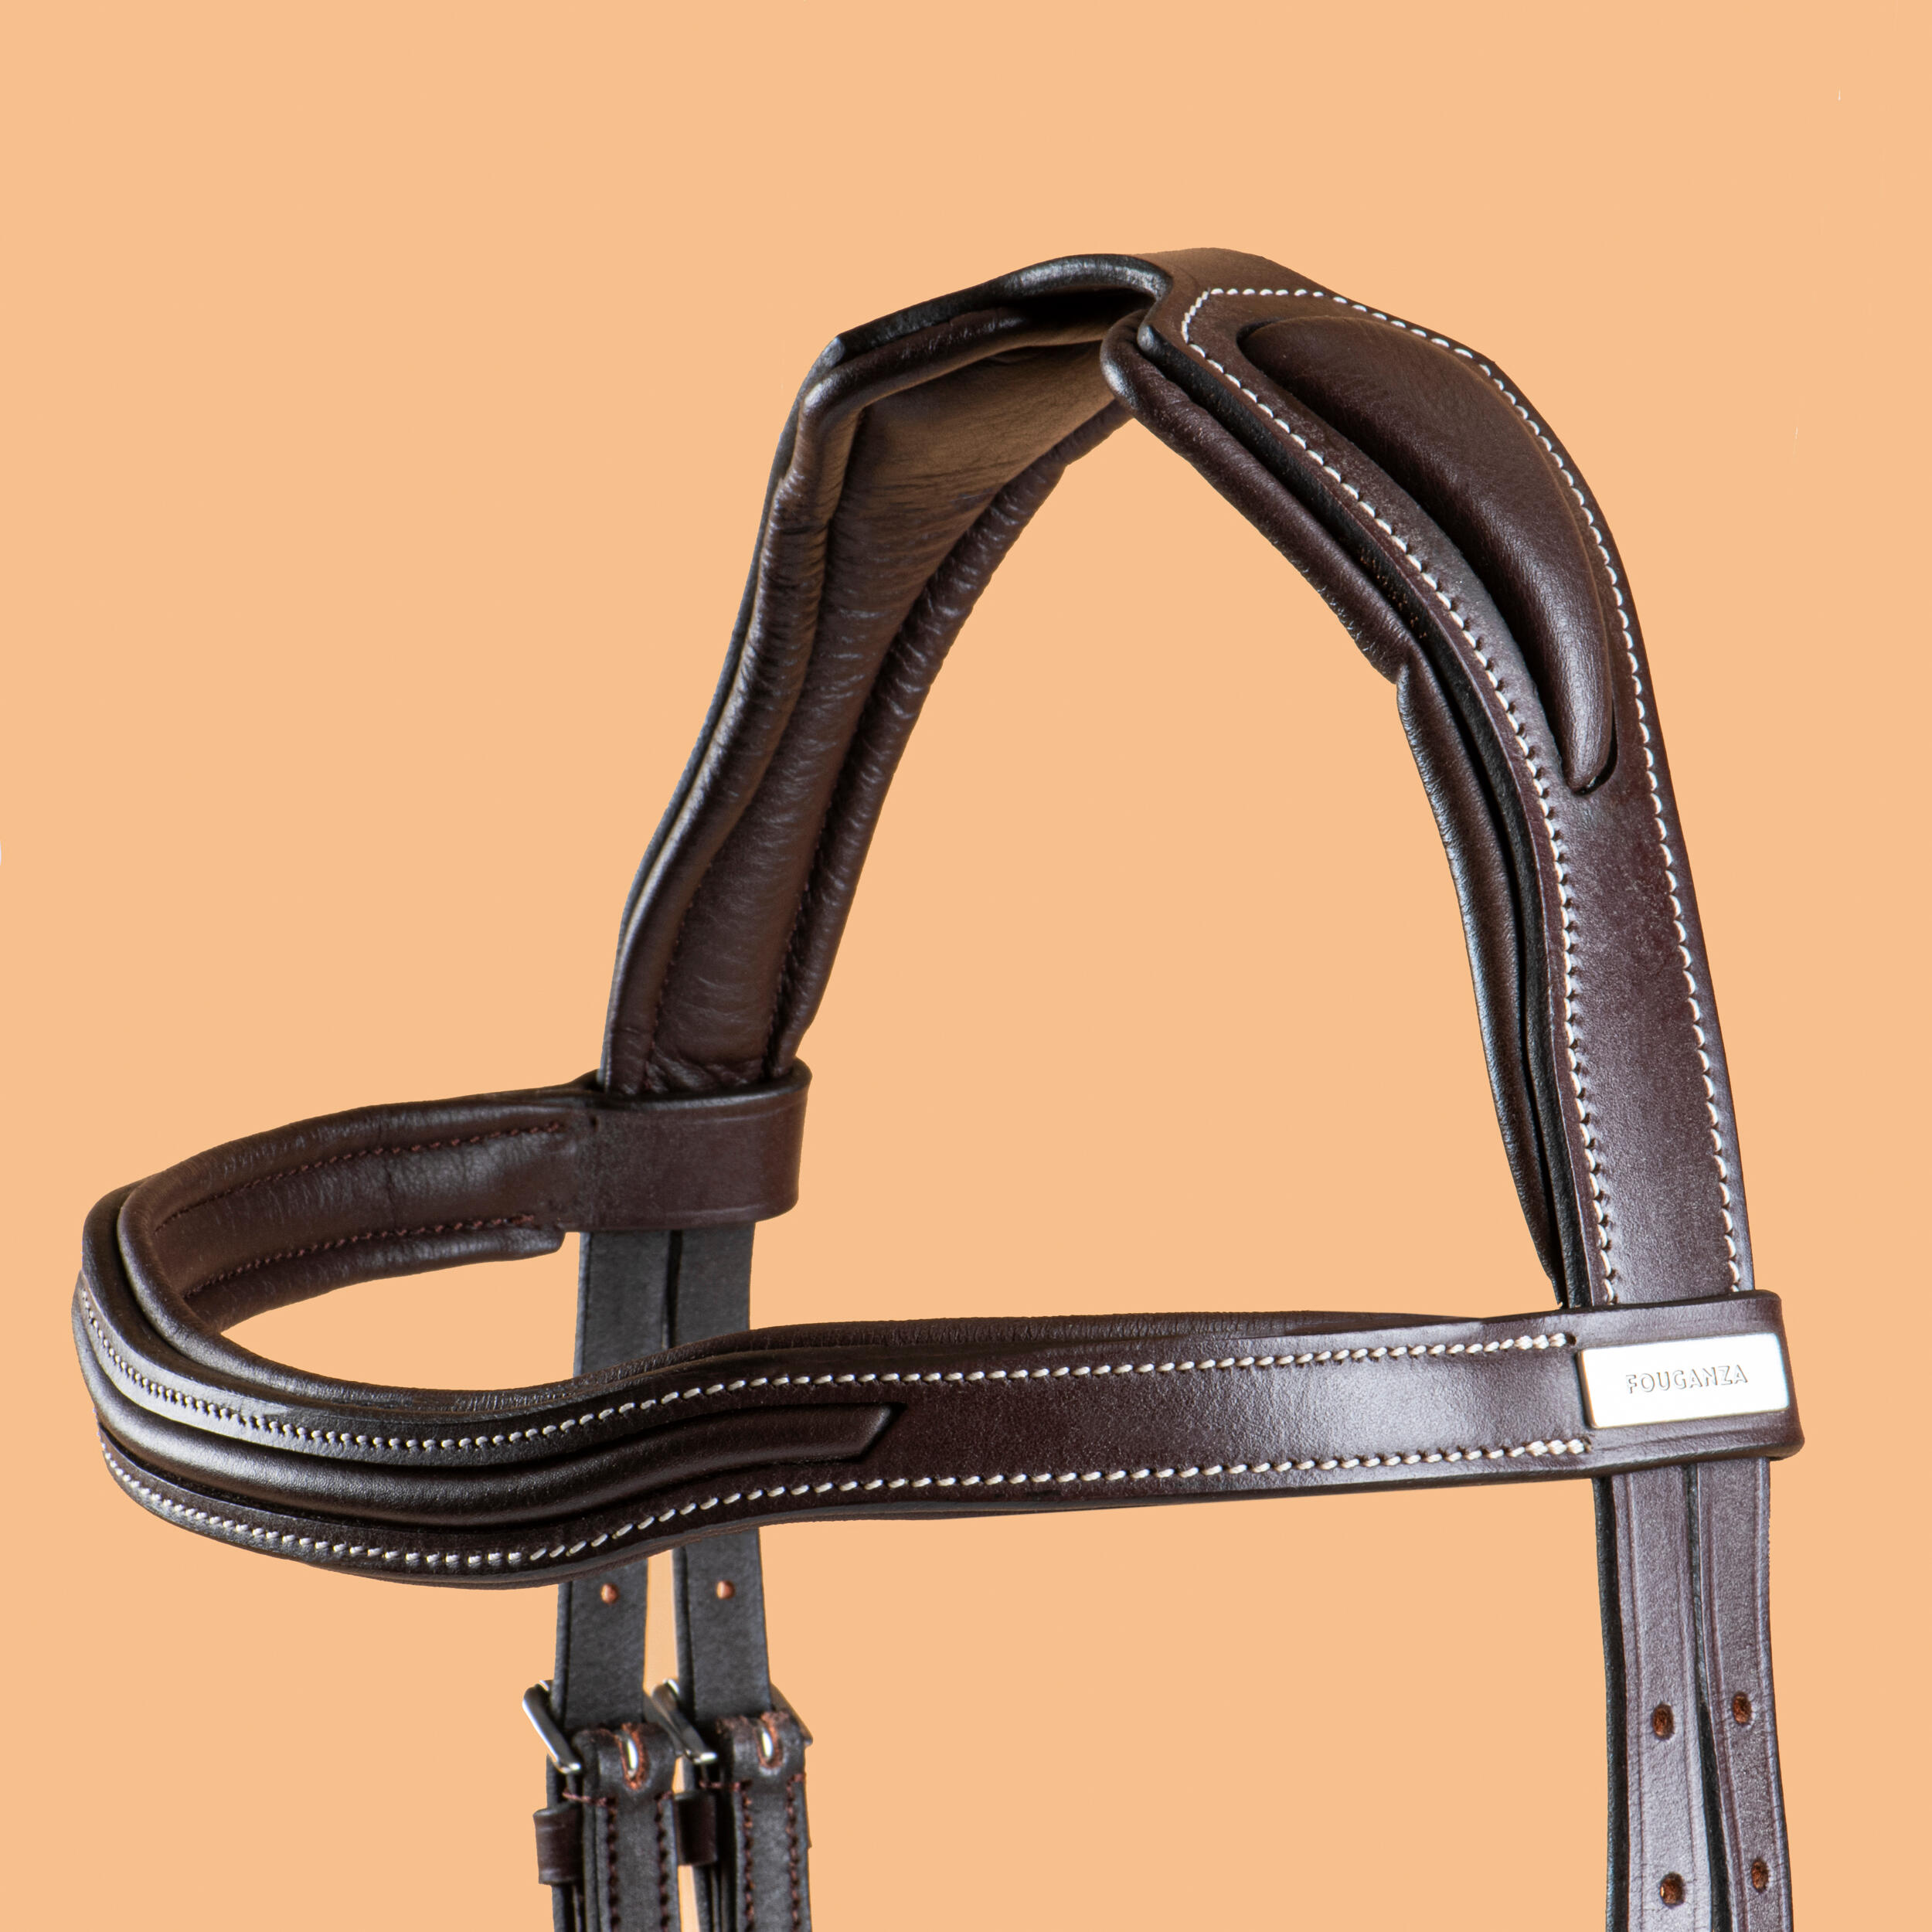 Horse & Pony Leather Bridle With French Noseband 900 - Dark Brown/Black 2/5